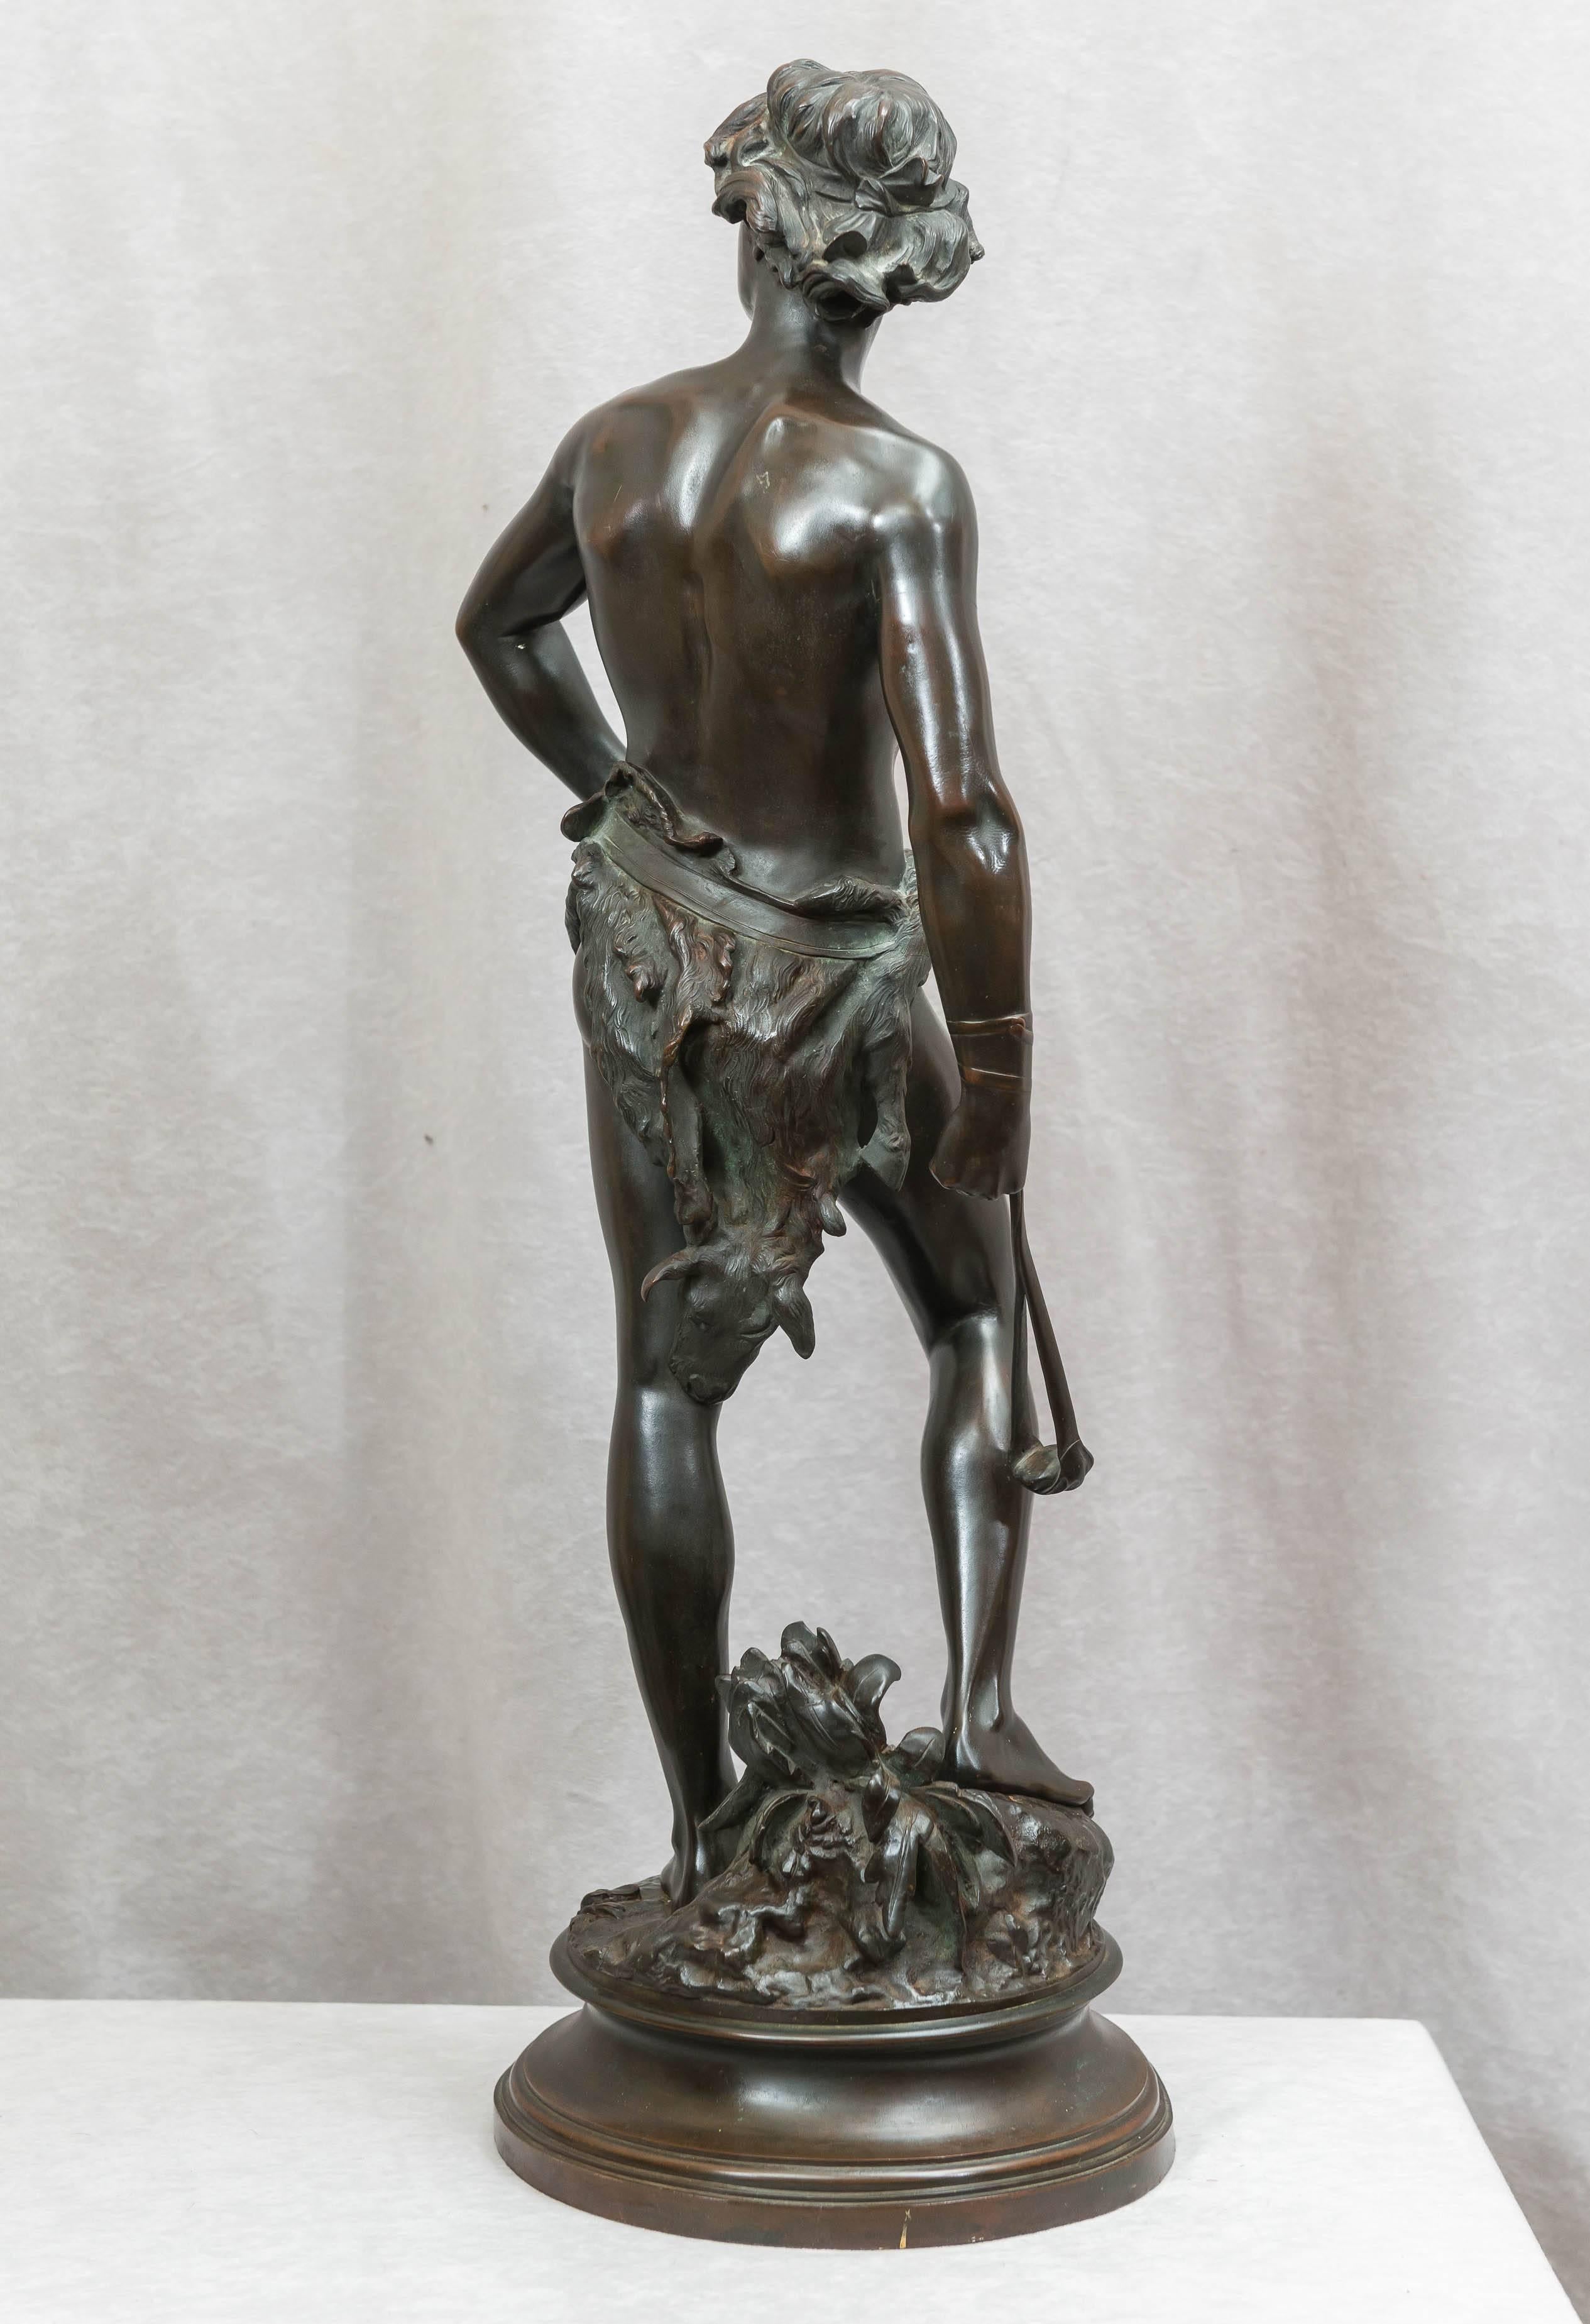 Patinated Antique Bronze of David Holding His Slingshot Ready for Action